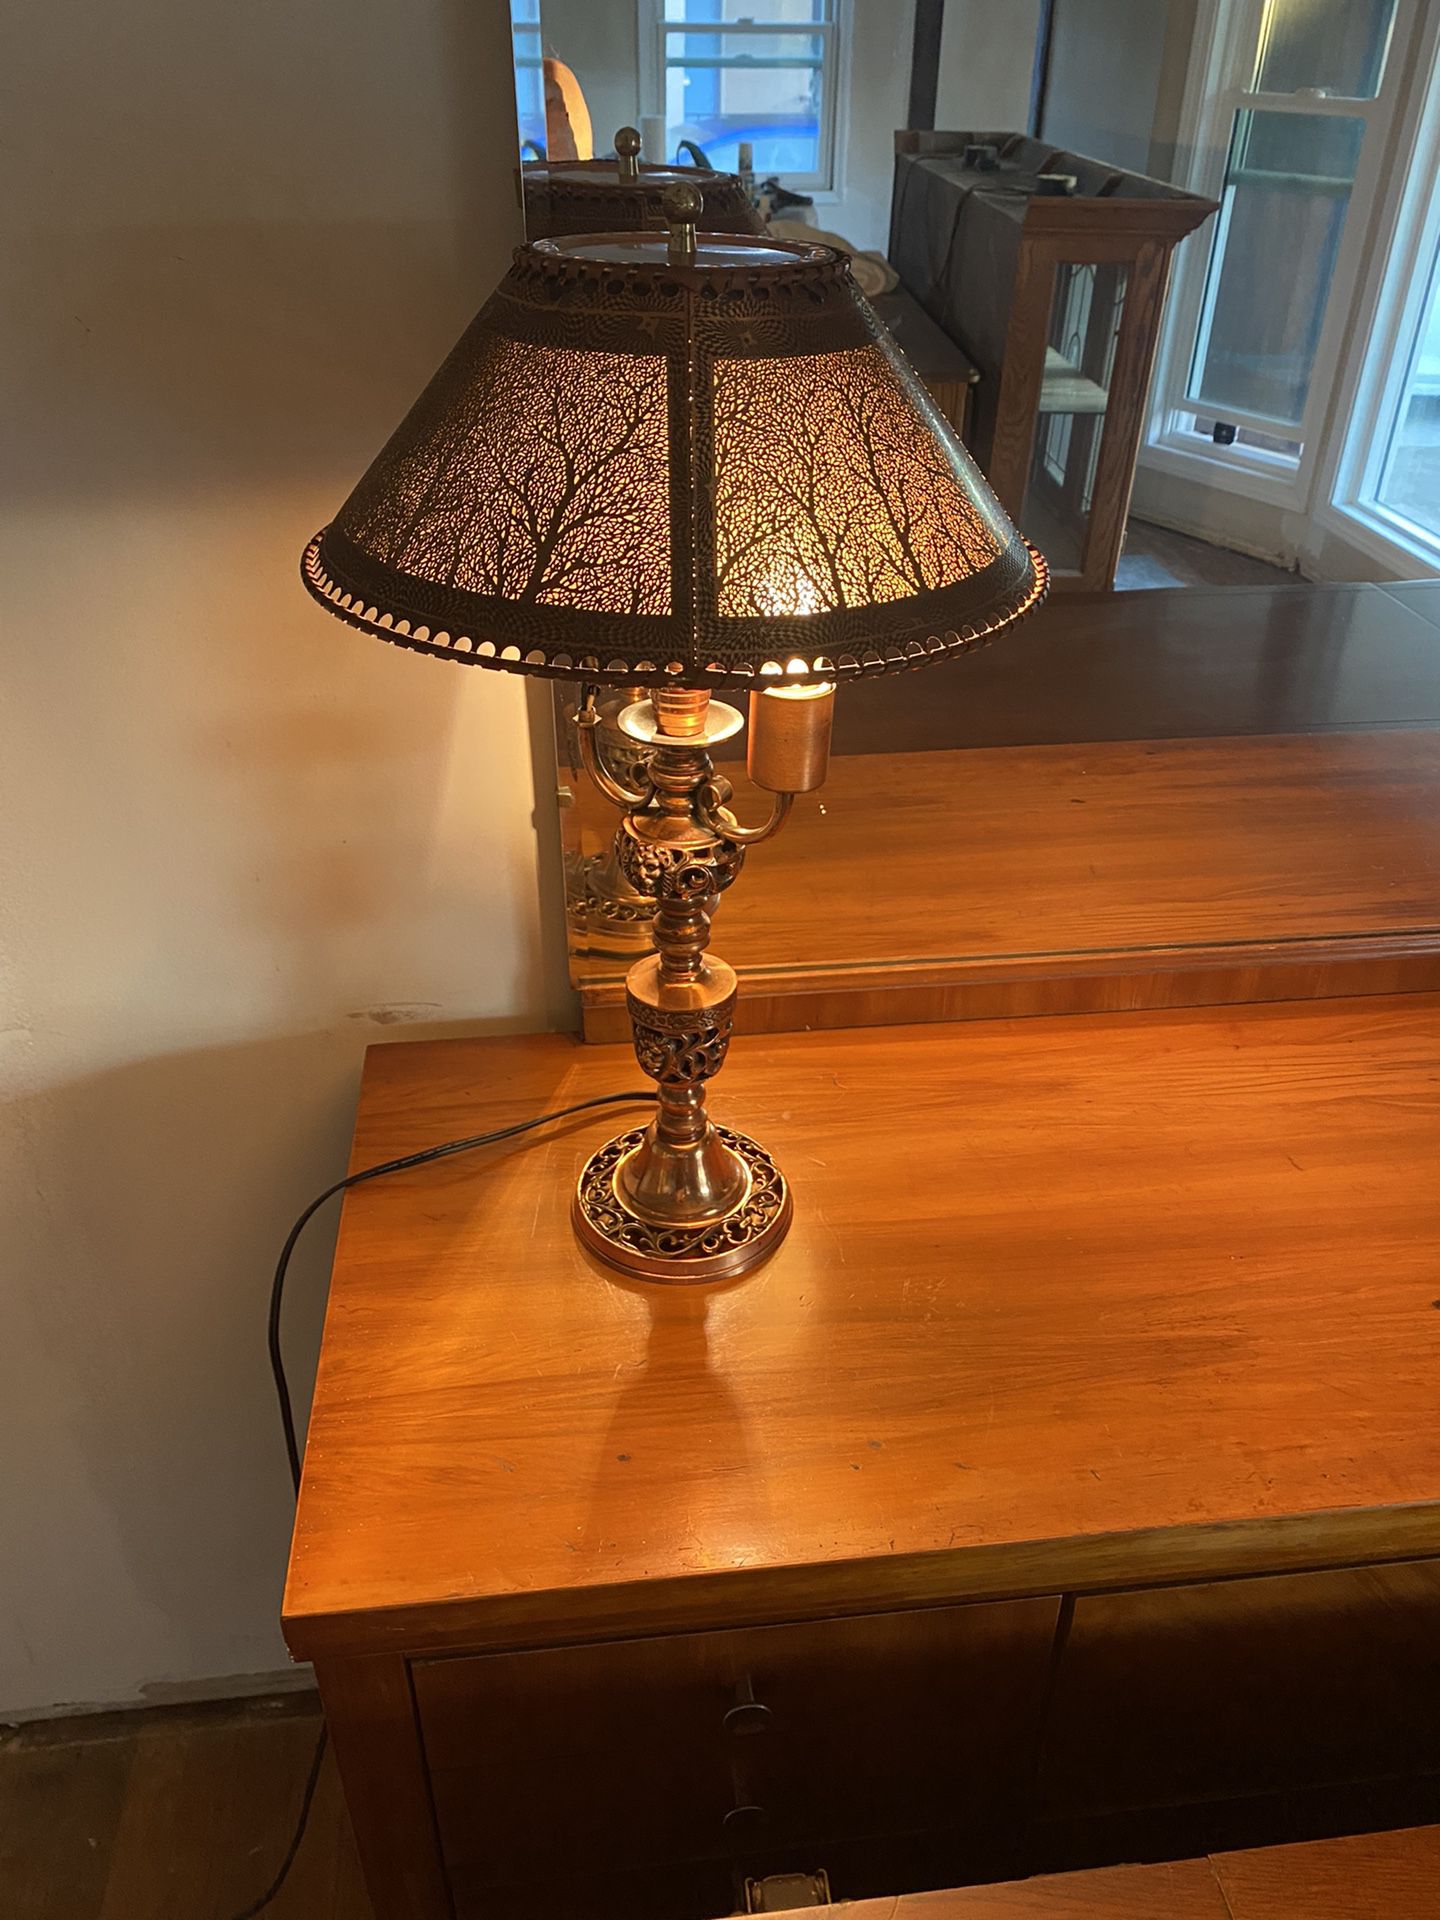 Very detailed Vintage copper lamp